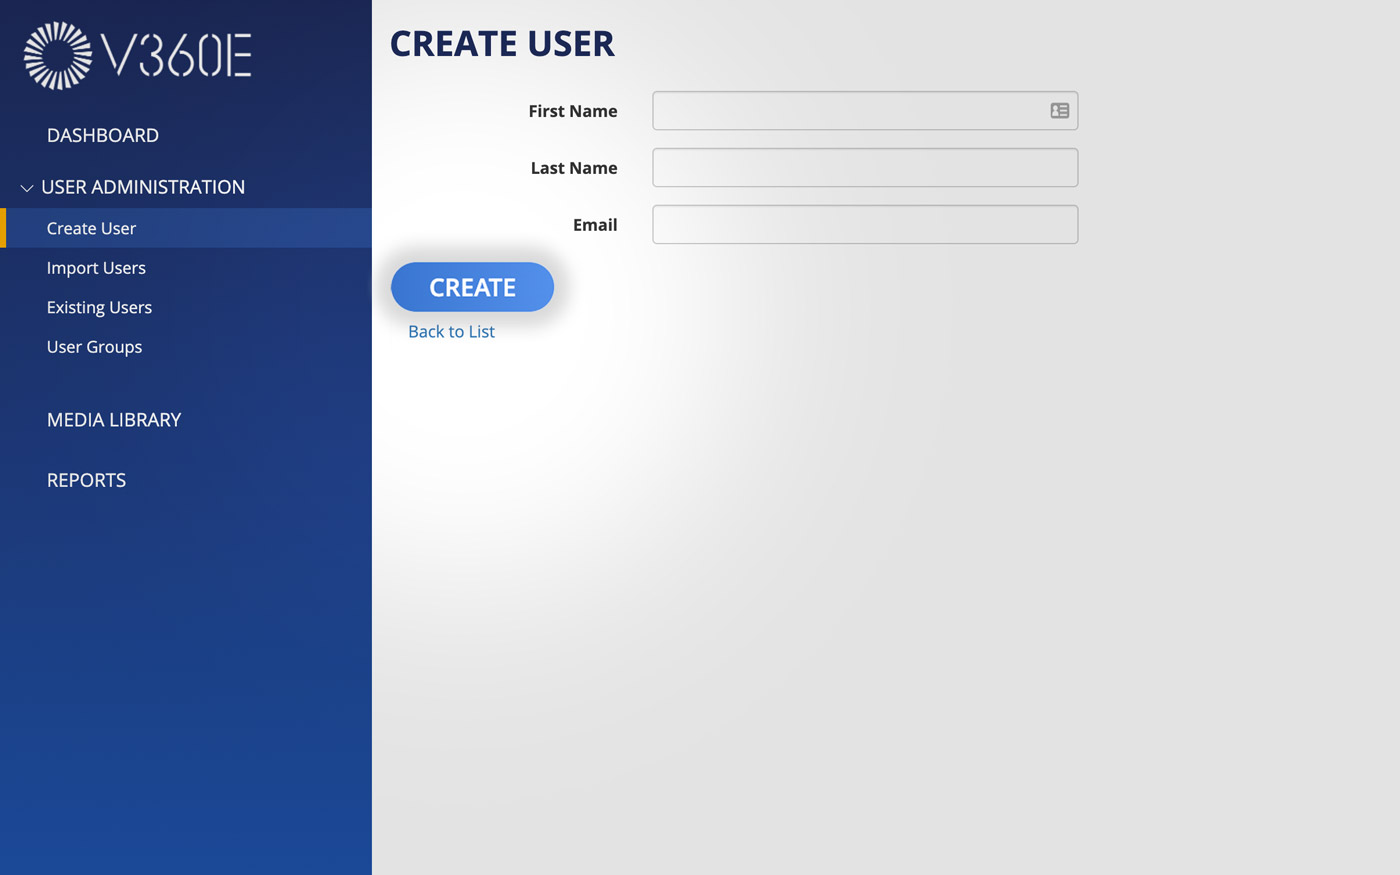 This image shows how to create end-users in V360E. 